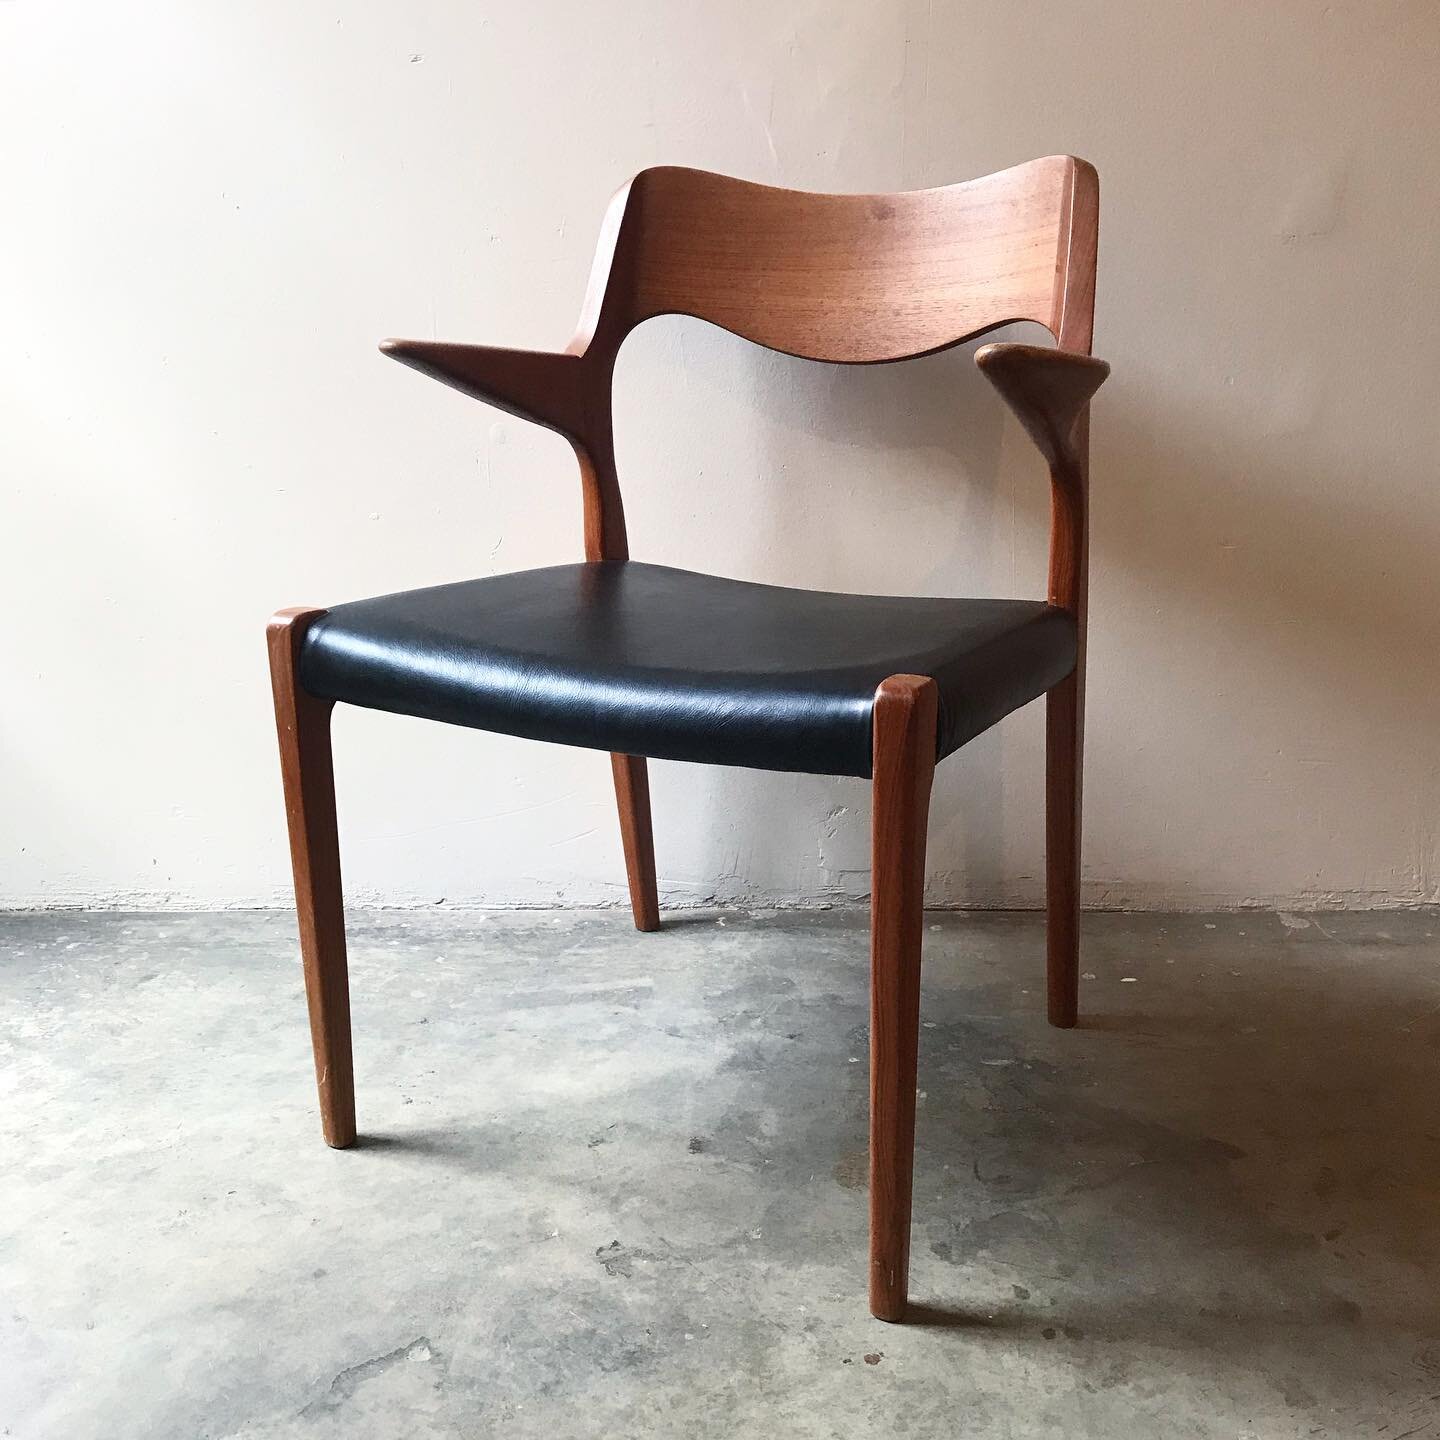 Recently recovered a set of 6 Danish teak dining chairs designed by Niels Otto M&oslash;ller. Named the Model 71, the armchair is a conversion from the original woven paper cord. Redone in sturdy and timeless black leather and done specially for @ran